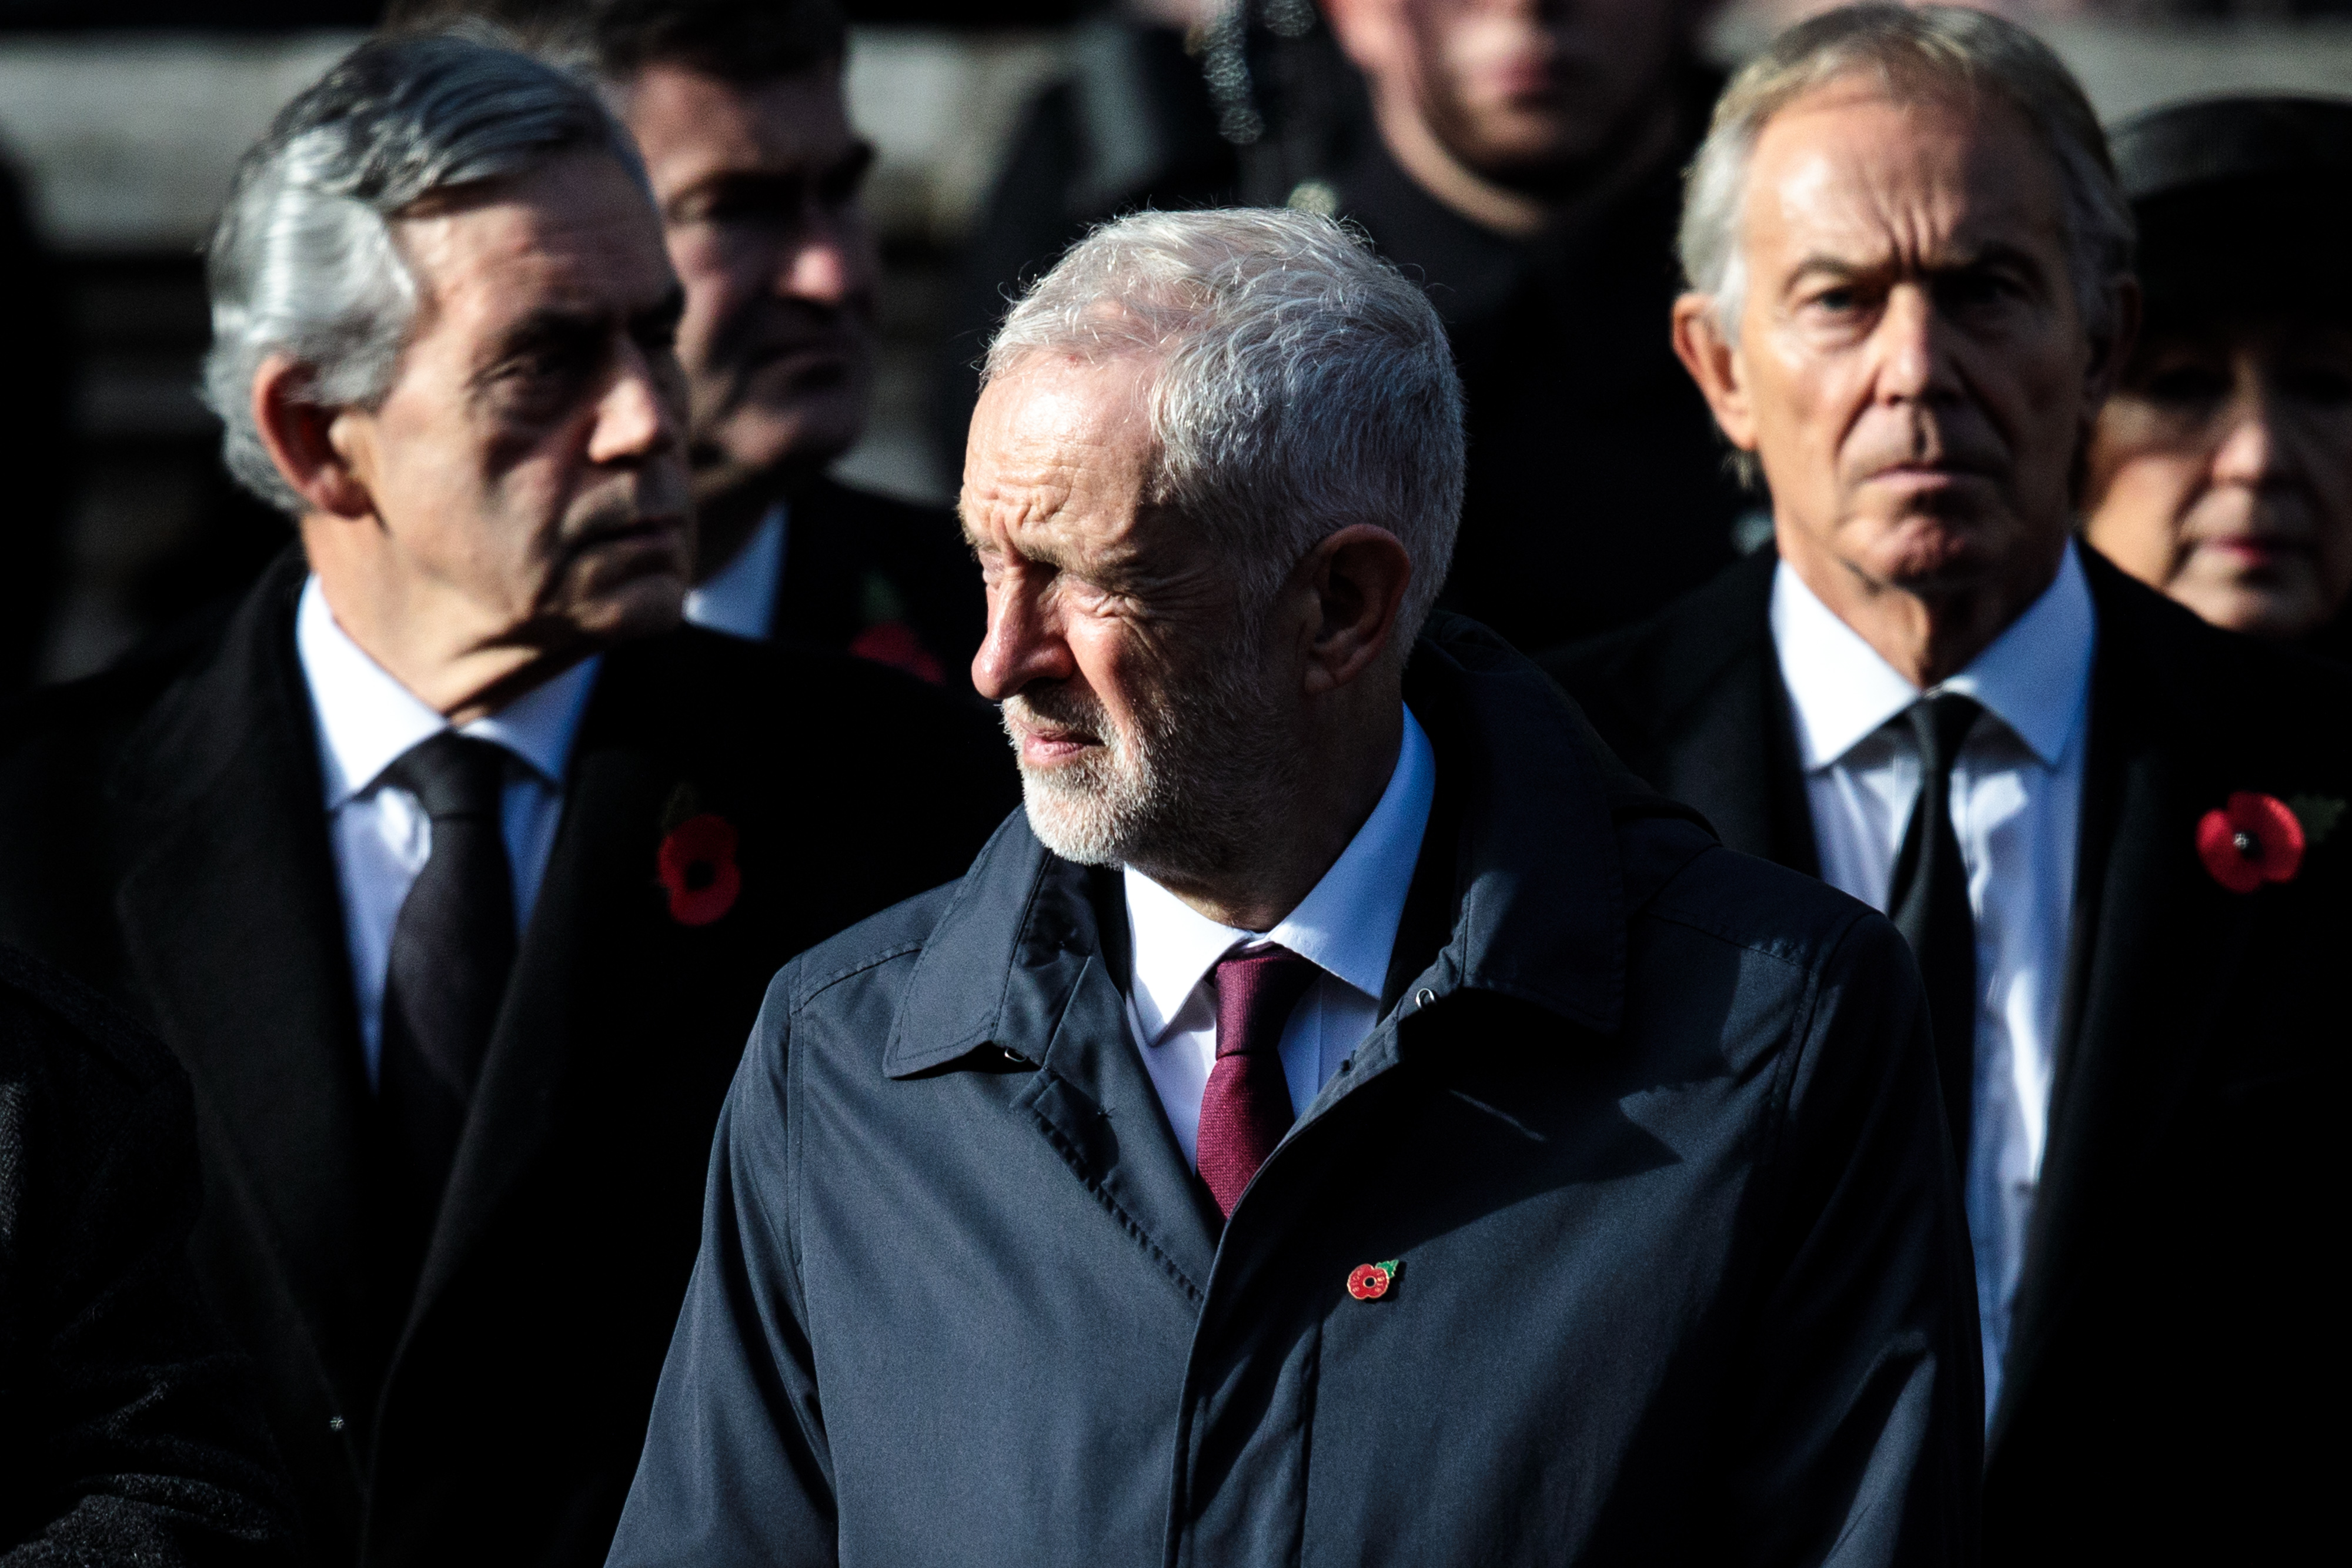 LONDON, ENGLAND - NOVEMBER 11: Former Prime Ministers Gordon Brown (L) and Tony Blair (R) stand behind Labour Leader Jeremy Corbyn (C) during the annual Remembrance Sunday memorial at the Cenotaph on Whitehall on November 11, 2018 in London, England. The armistice ending the First World War between the Allies and Germany was signed at Compiègne, France on eleventh hour of the eleventh day of the eleventh month - 11am on the 11th November 1918. This day is commemorated as Remembrance Day with special attention being paid for this year’s centenary. (Photo by Jack Taylor/Getty Images)